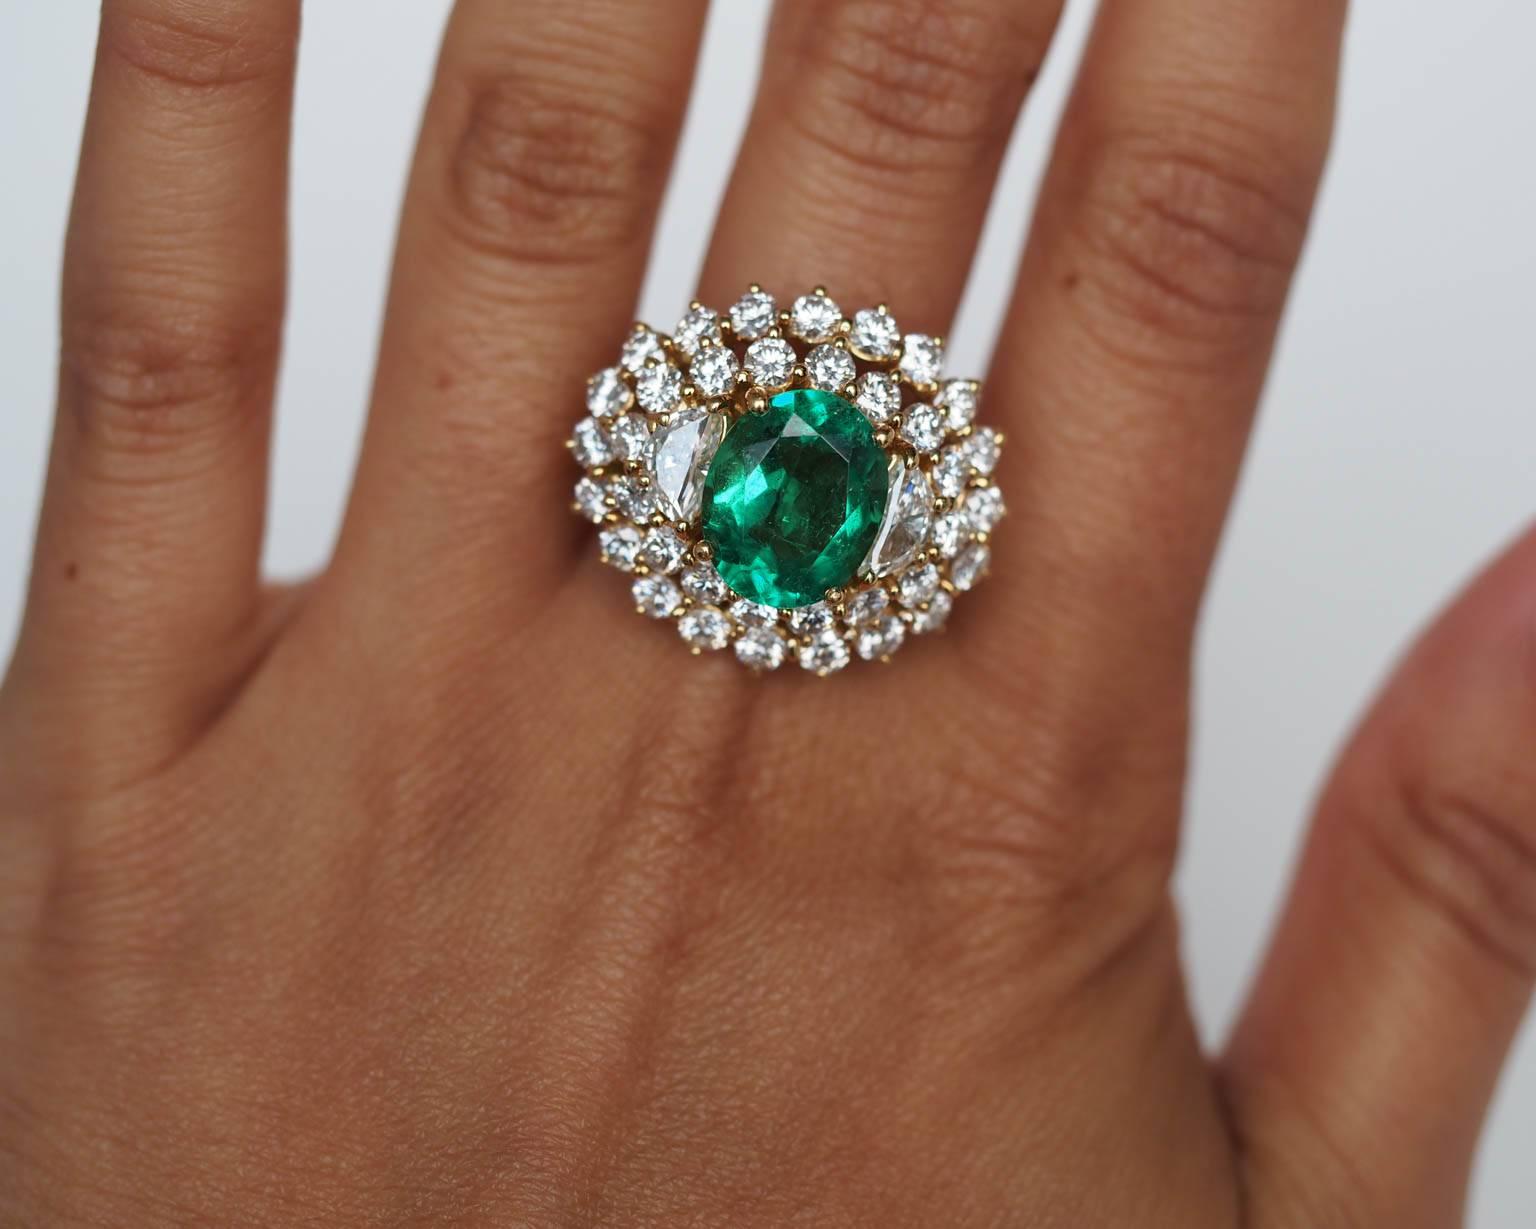 Here is an awesome piece, with extremely well crafted components. The center stone is a 3.94ct Natural Emerald, with Insignificant enhancement. The origin on the piece is COLOMBIA, which is know to house the finest quality gems in the world. The